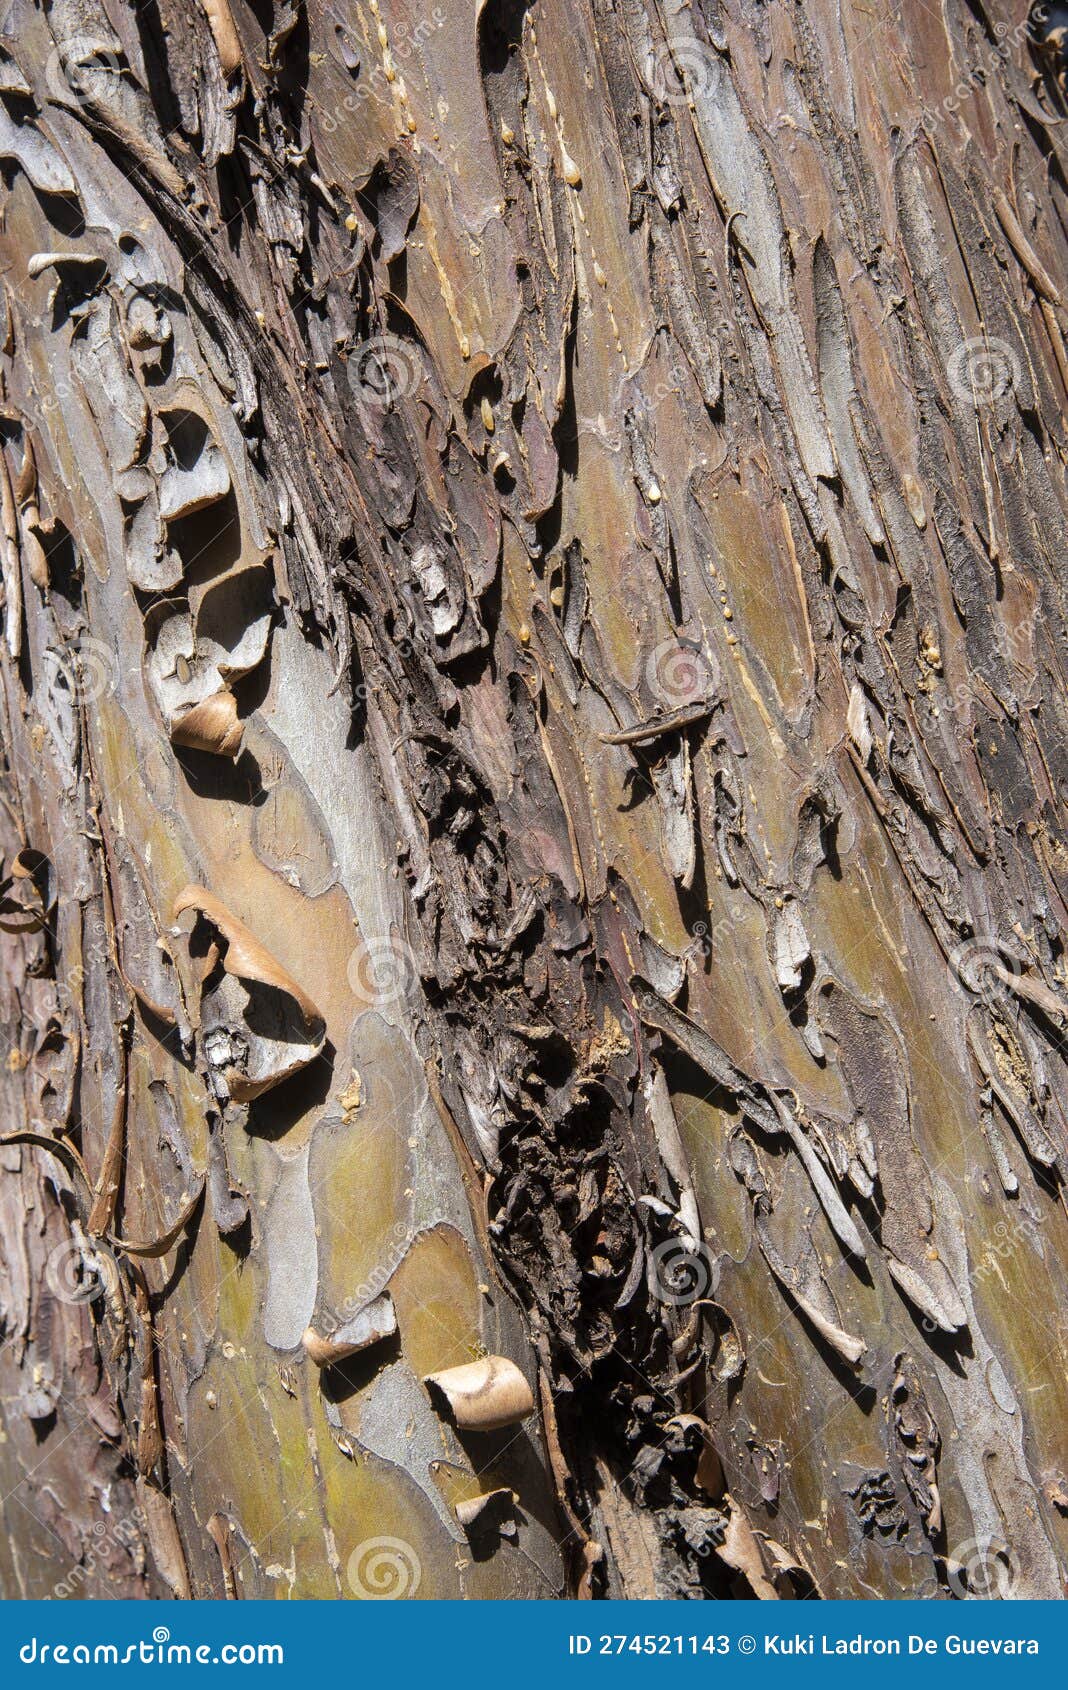 detail of the bark of a tree trunk